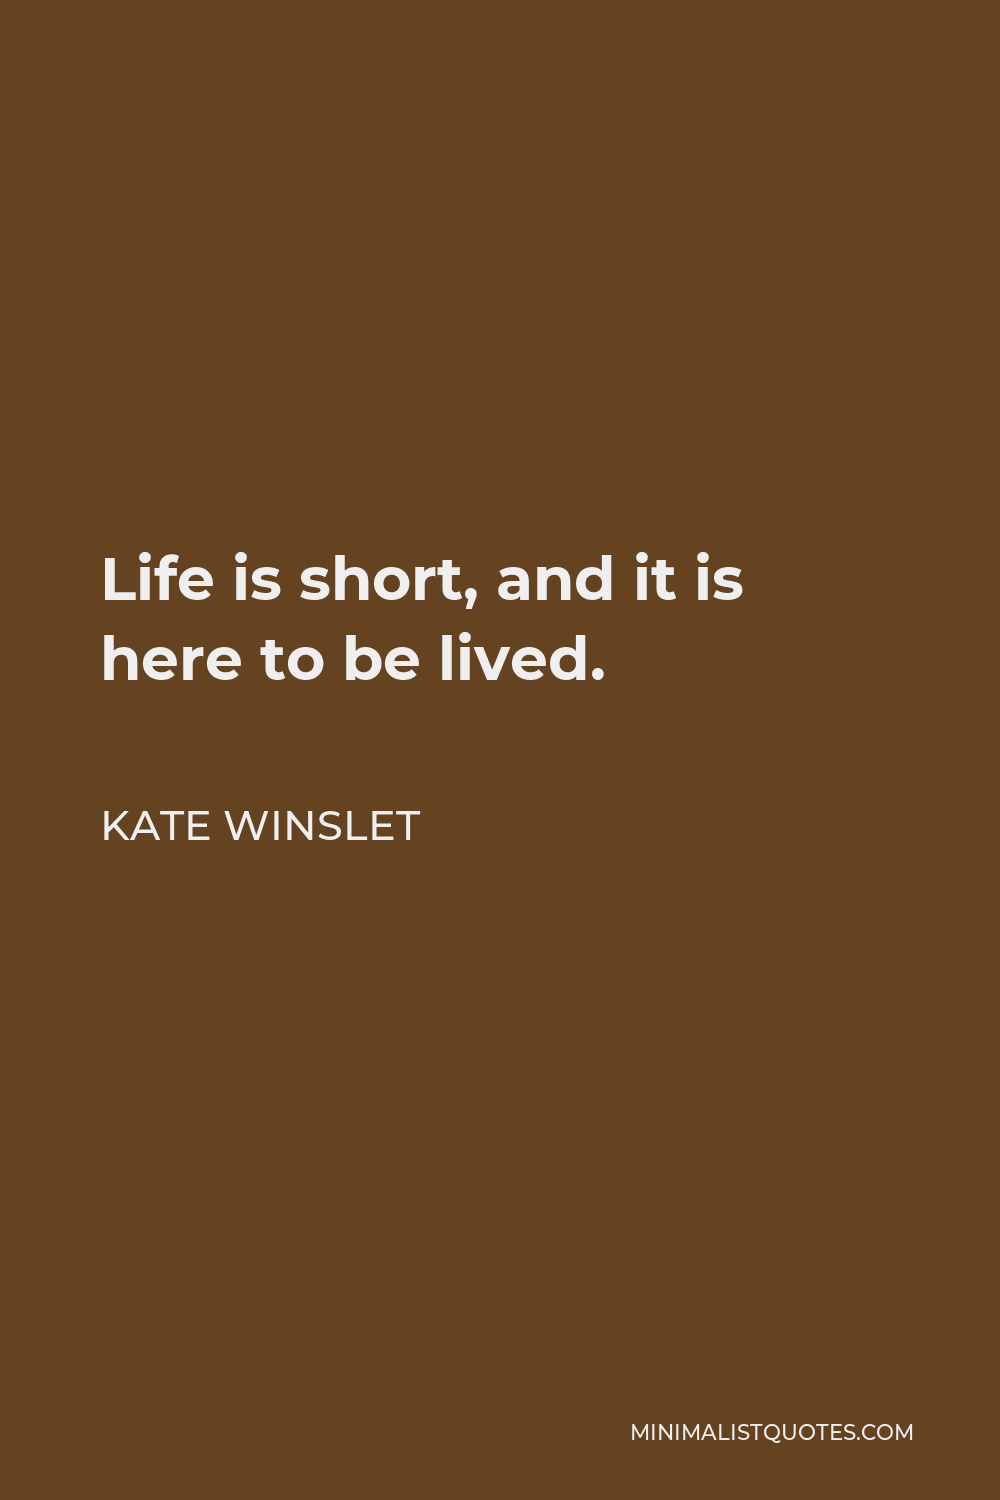 Life is short, and it is here to be lived. - Kate Winslet #habits  #motivationfortheday #motivateyourself…